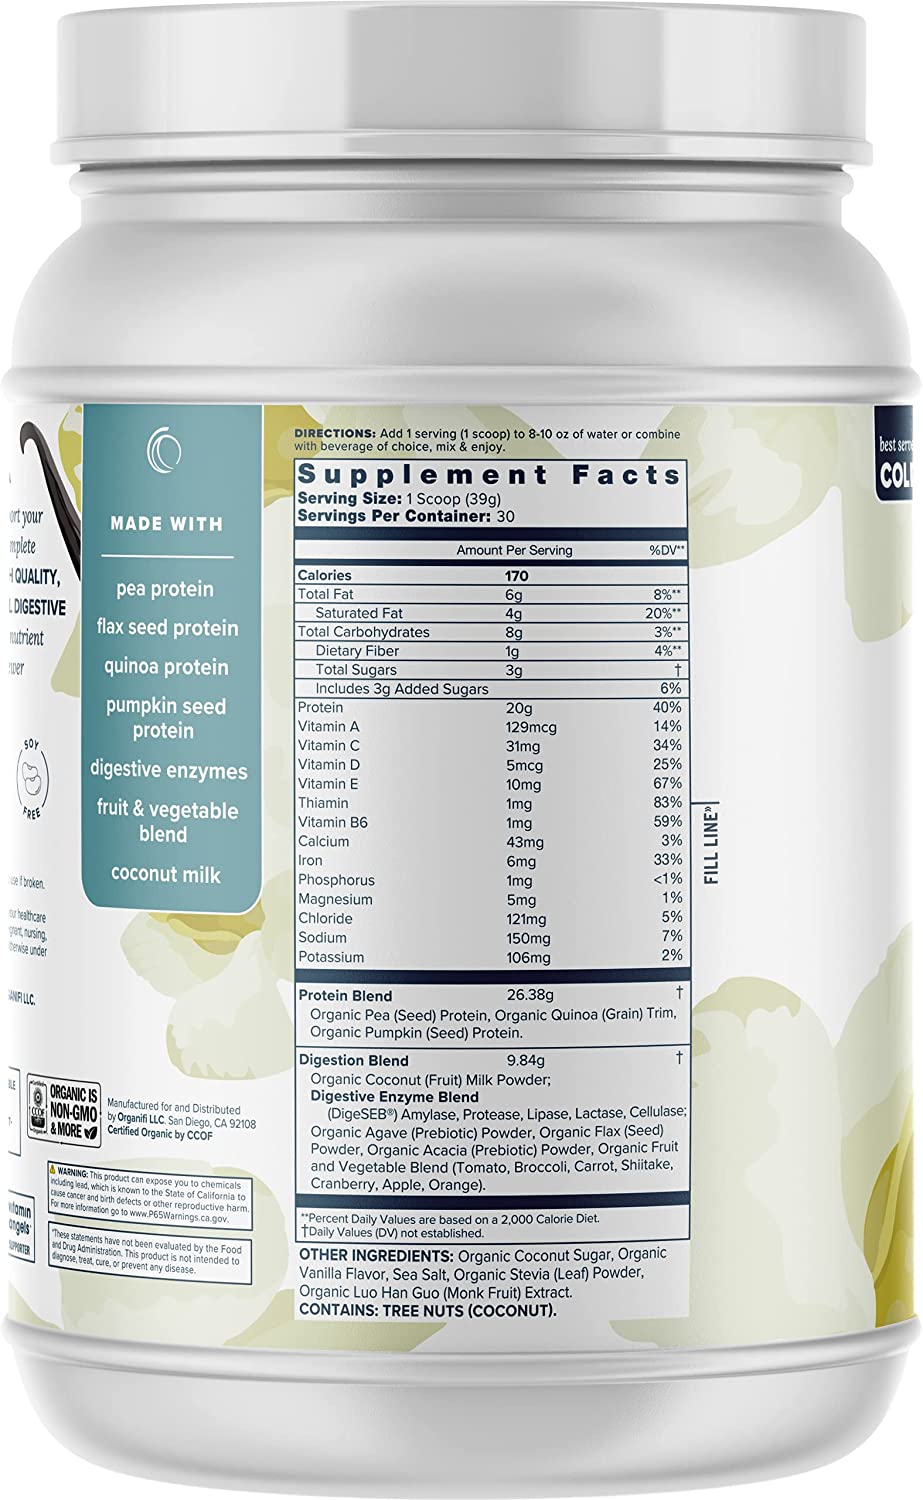 The supplement facts of the Organifi Complete Protein Vanilla canister